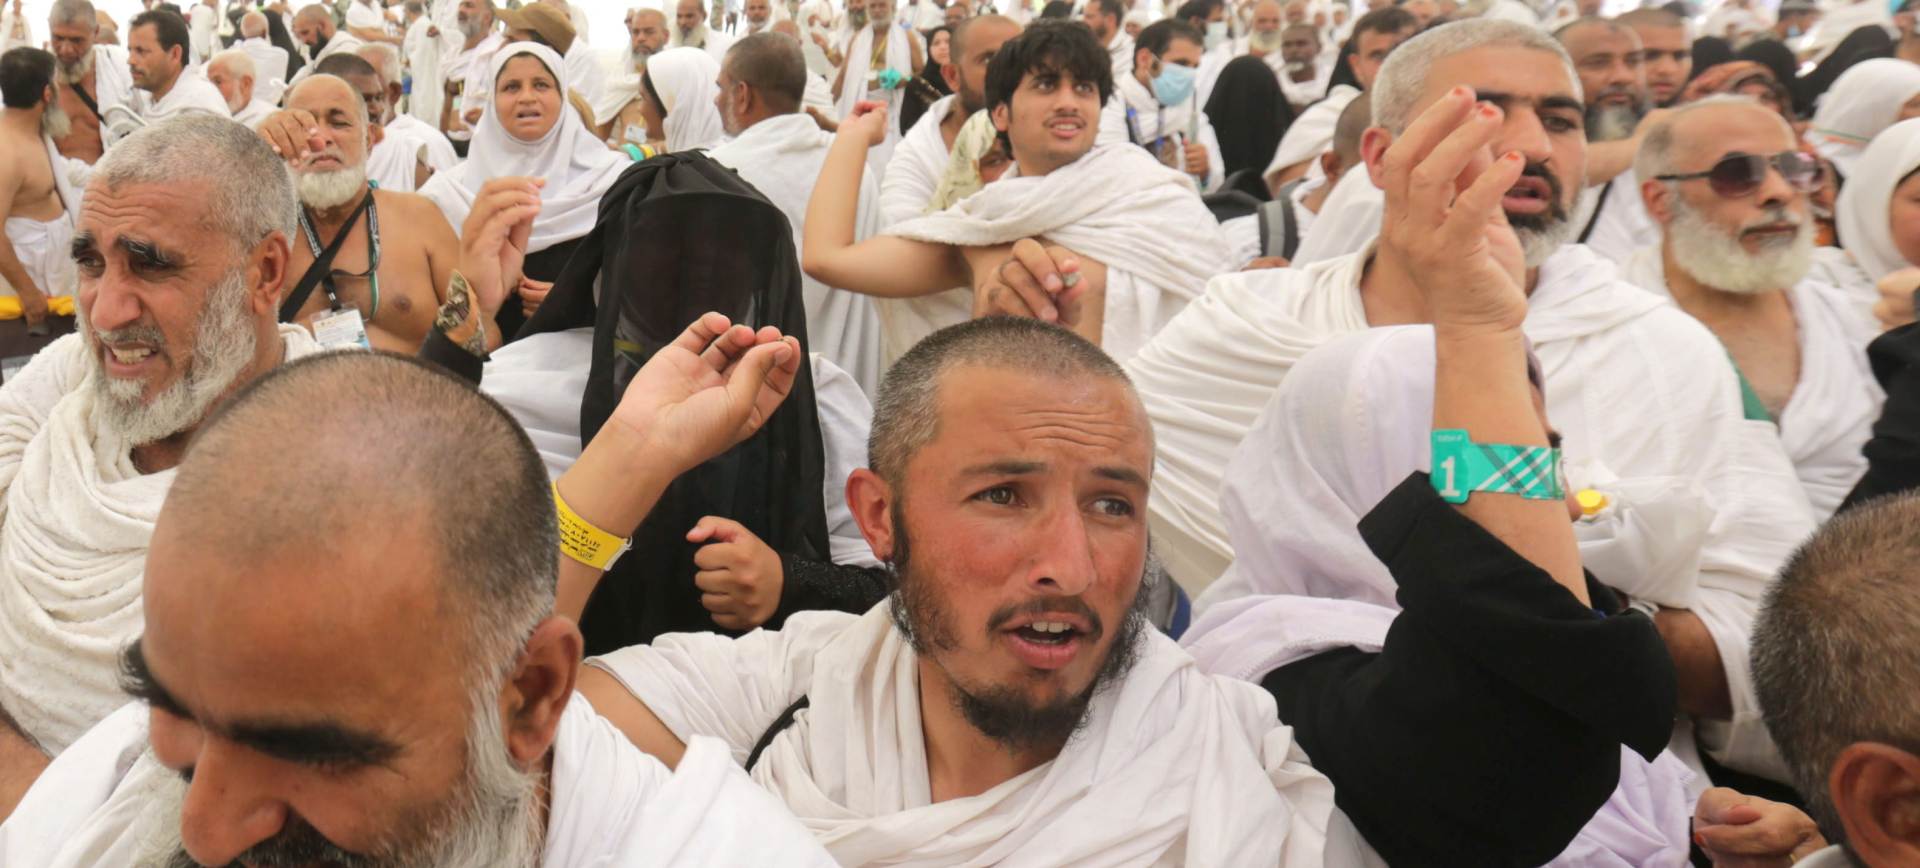 epa04947328 Muslim pilgrims throw stones at a symbolic devil while attering prayers, hours after a stampede had taken place in Mina, near Mecca, Saudi Arabia, 24 September 2015. According to Saudi authorities, the death toll of the stampede which occurred as pilgrims observed on the  rituals of the Haj pilgrimage exceeded 700 and 800 injured. Haj 2015 takes place from 22 to 26 September  EPA/AMEL PAIN